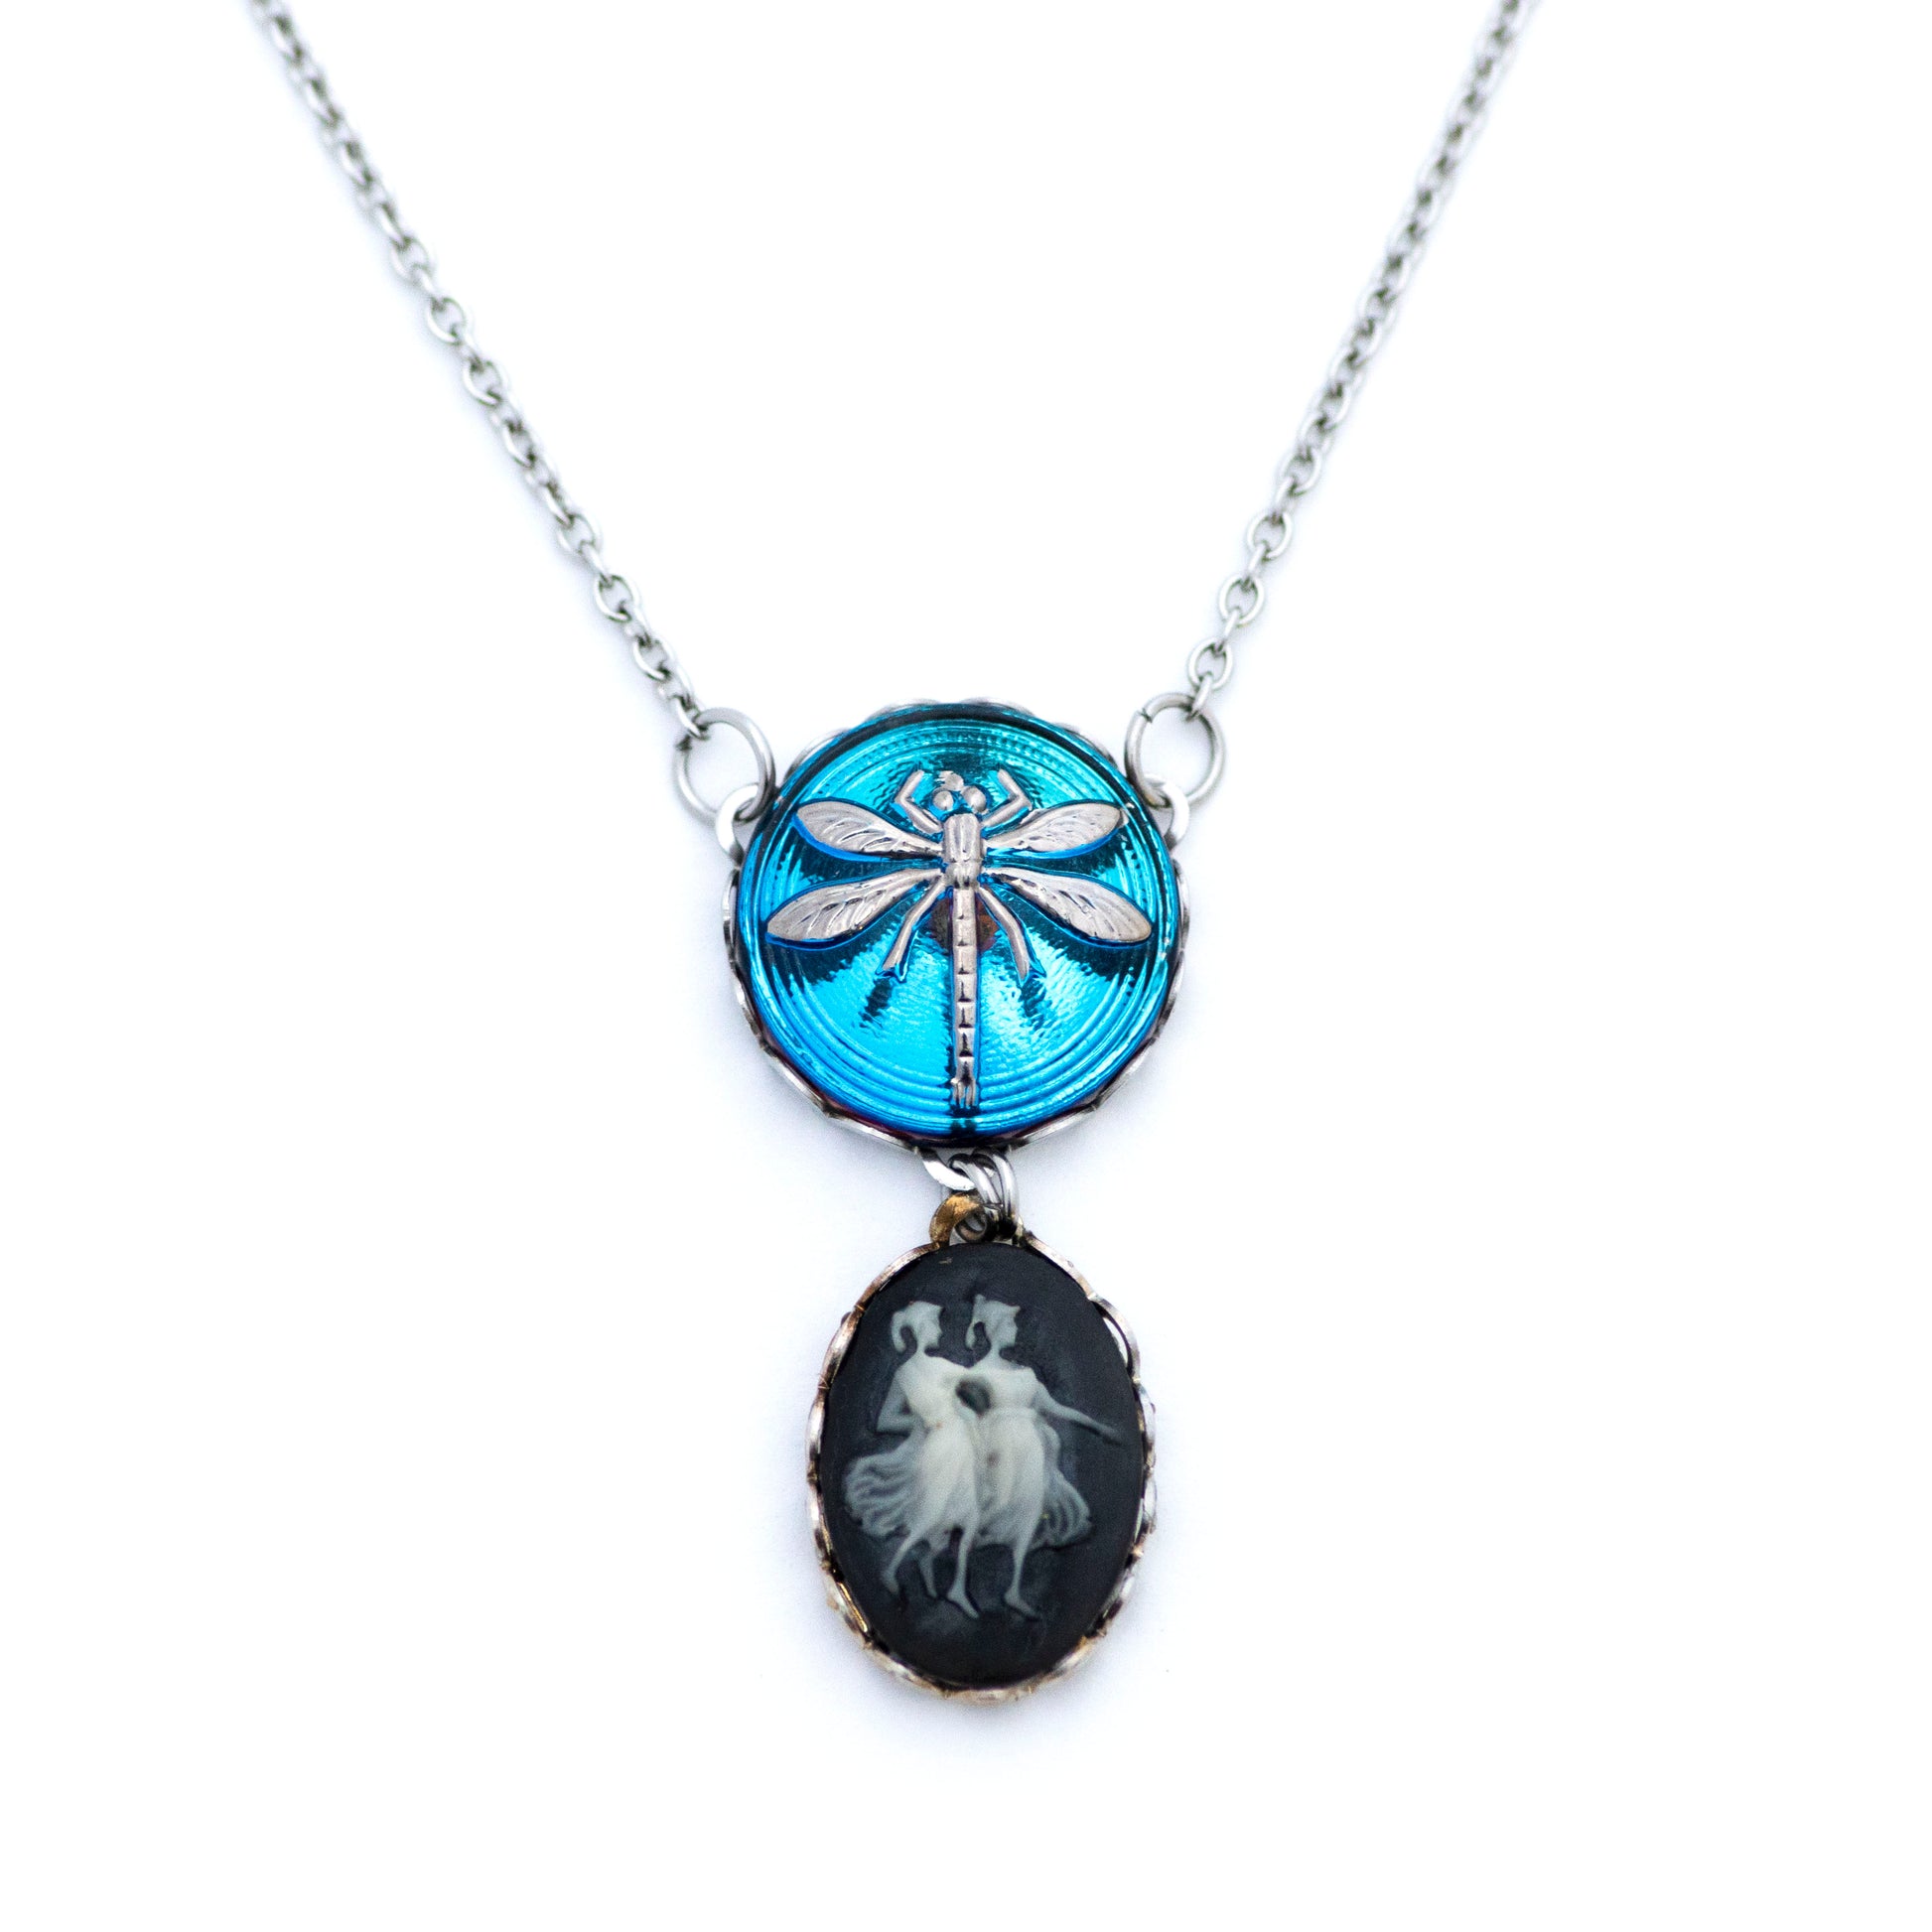 Blue and silver platinum painted dragonfly Czech glass button. Button pendant necklace. Resin black and white cameo.